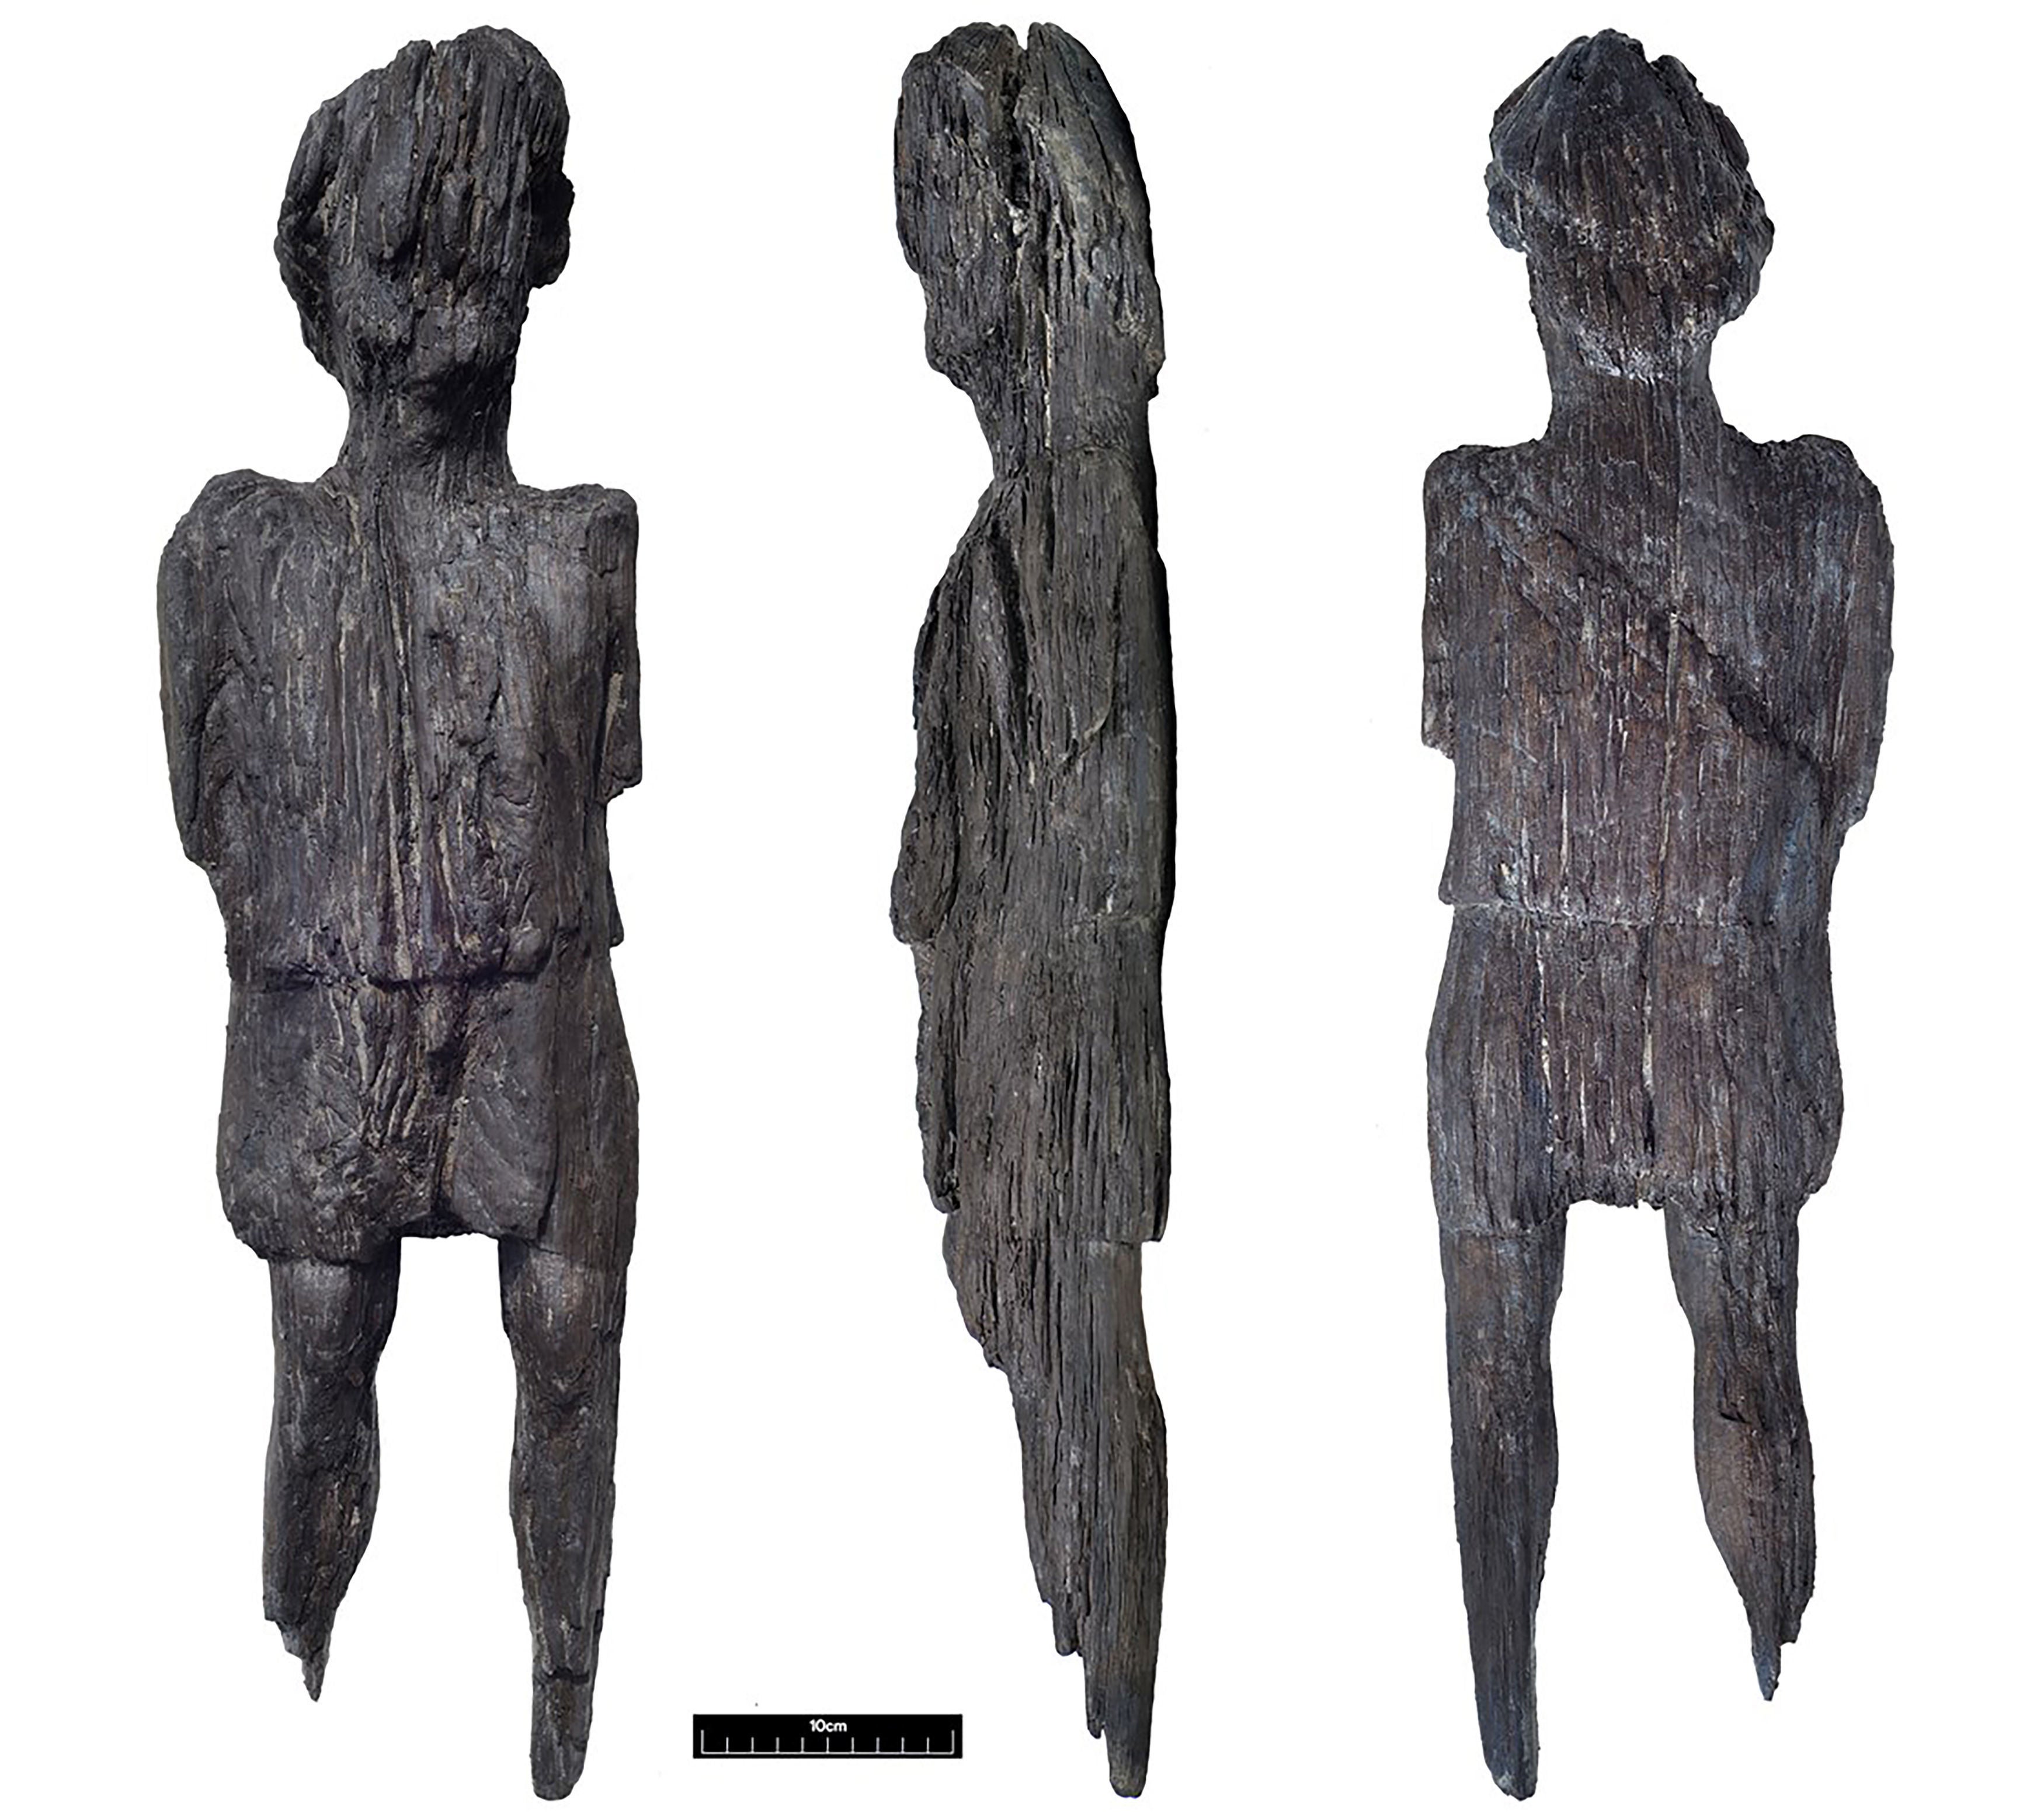 The style of the carving and the tunic-like clothing suggest the figure could date from the early Roman period almost 2,000 years ago